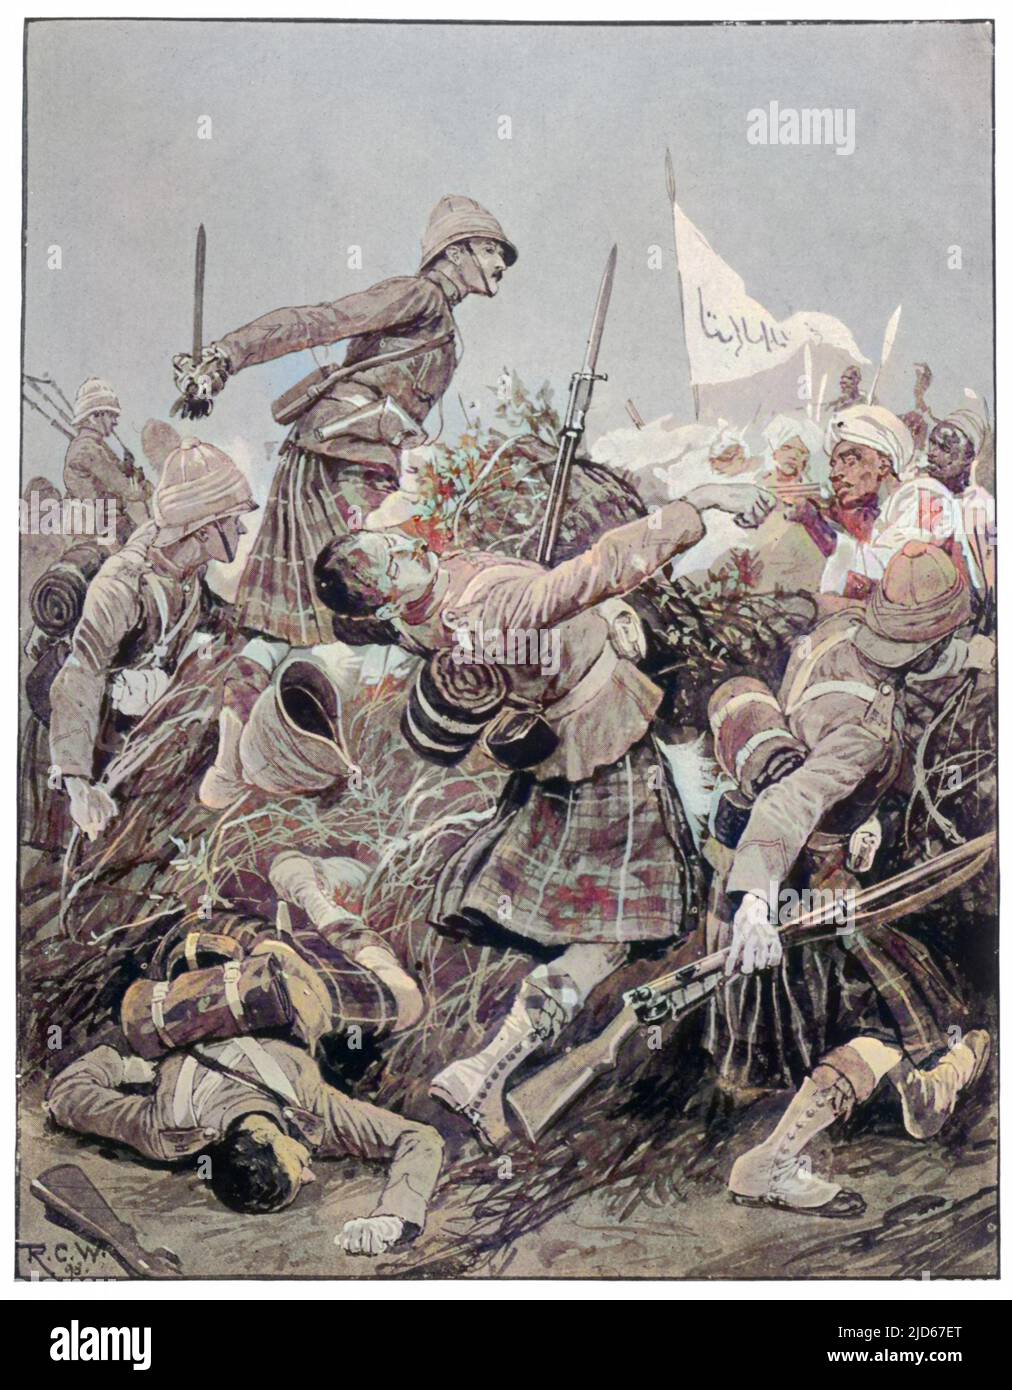 The Seaforth Highlanders storming the Zareba at the Battle of Atbara. Colourised version of : 10019272       Date: 8th April 1898 Stock Photo